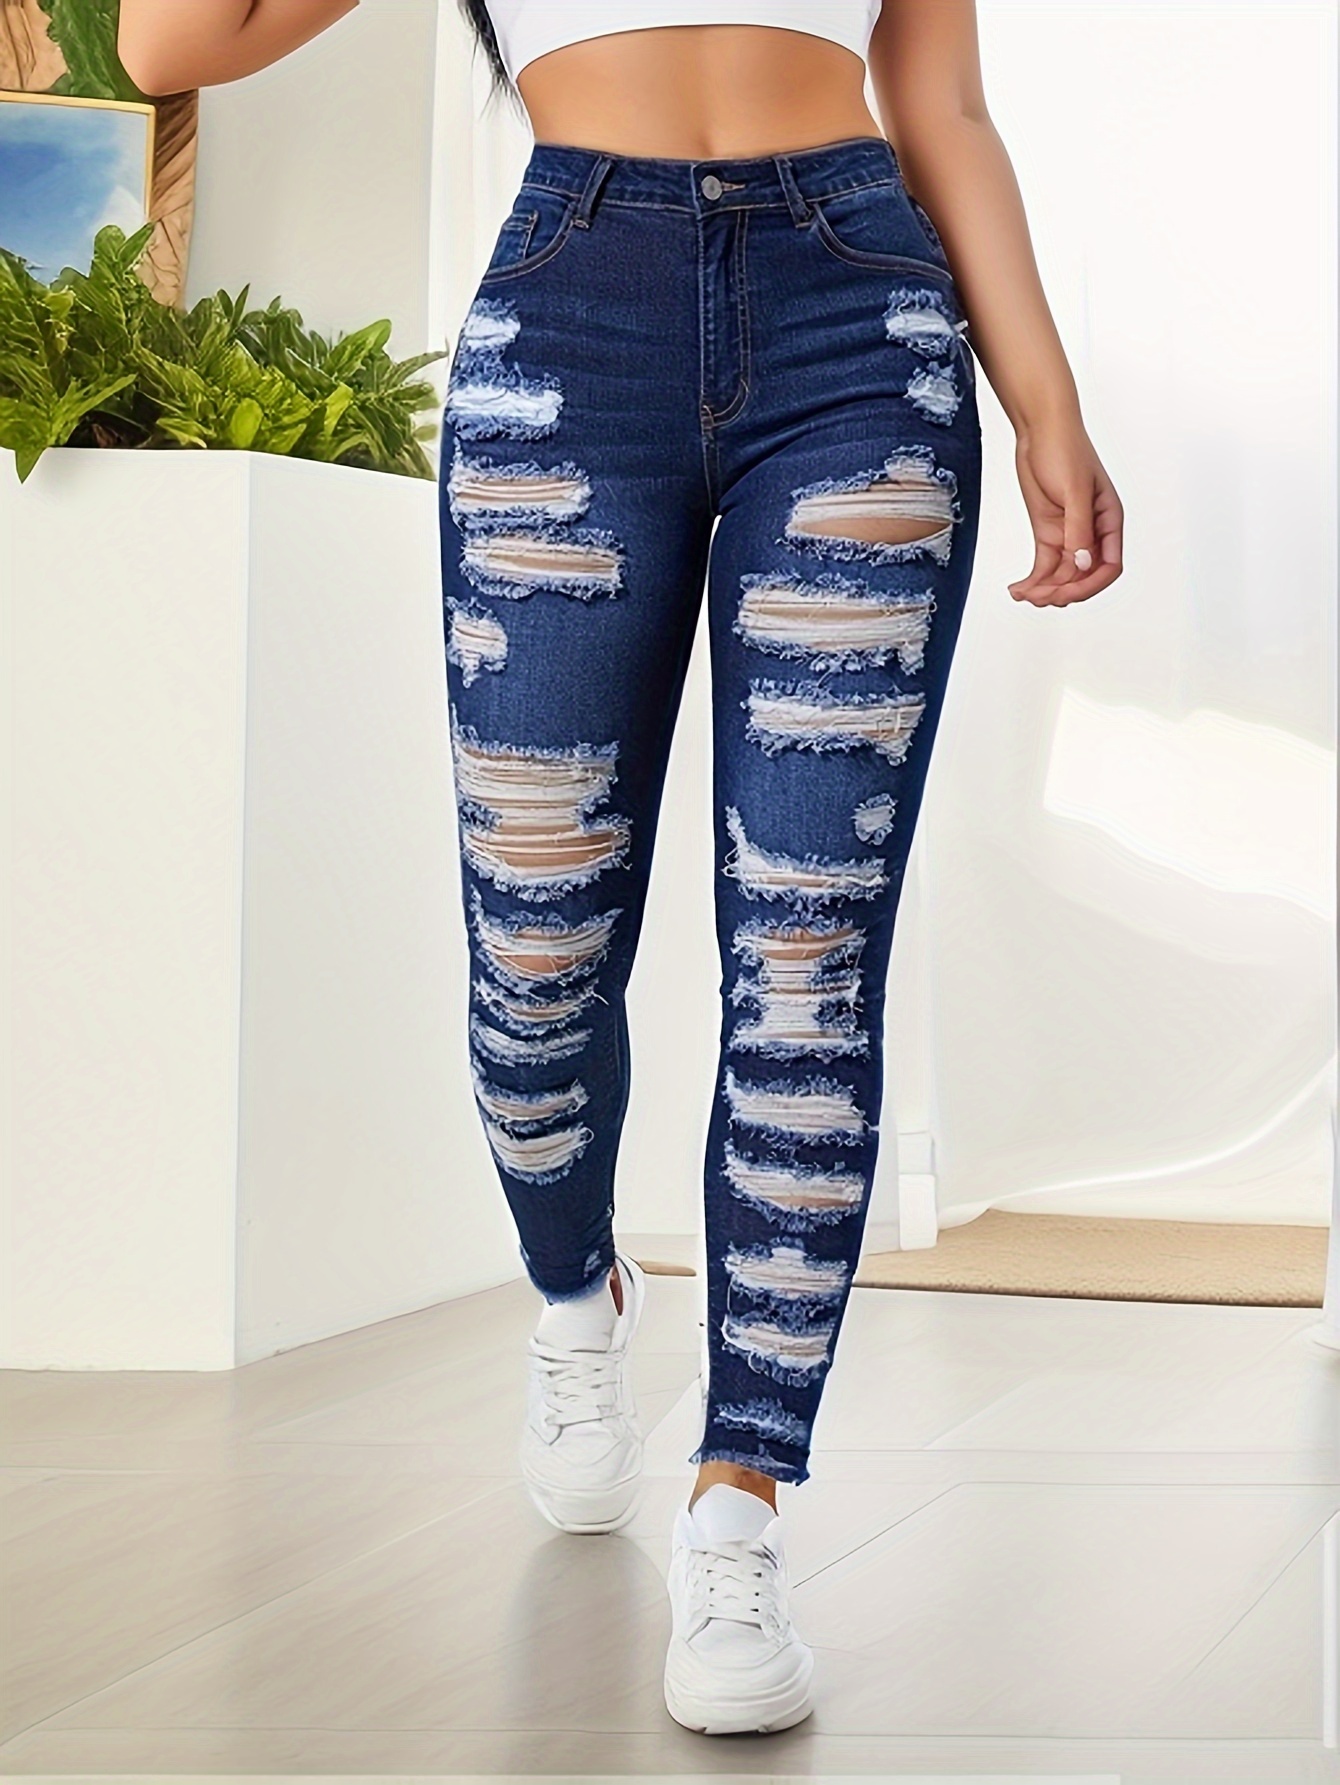 Women's Distressed Jeans Tapped Leg Skinny Fit Denim Pants Ripped Jeans  Classic Design Stretchy ouc2537ouc2537